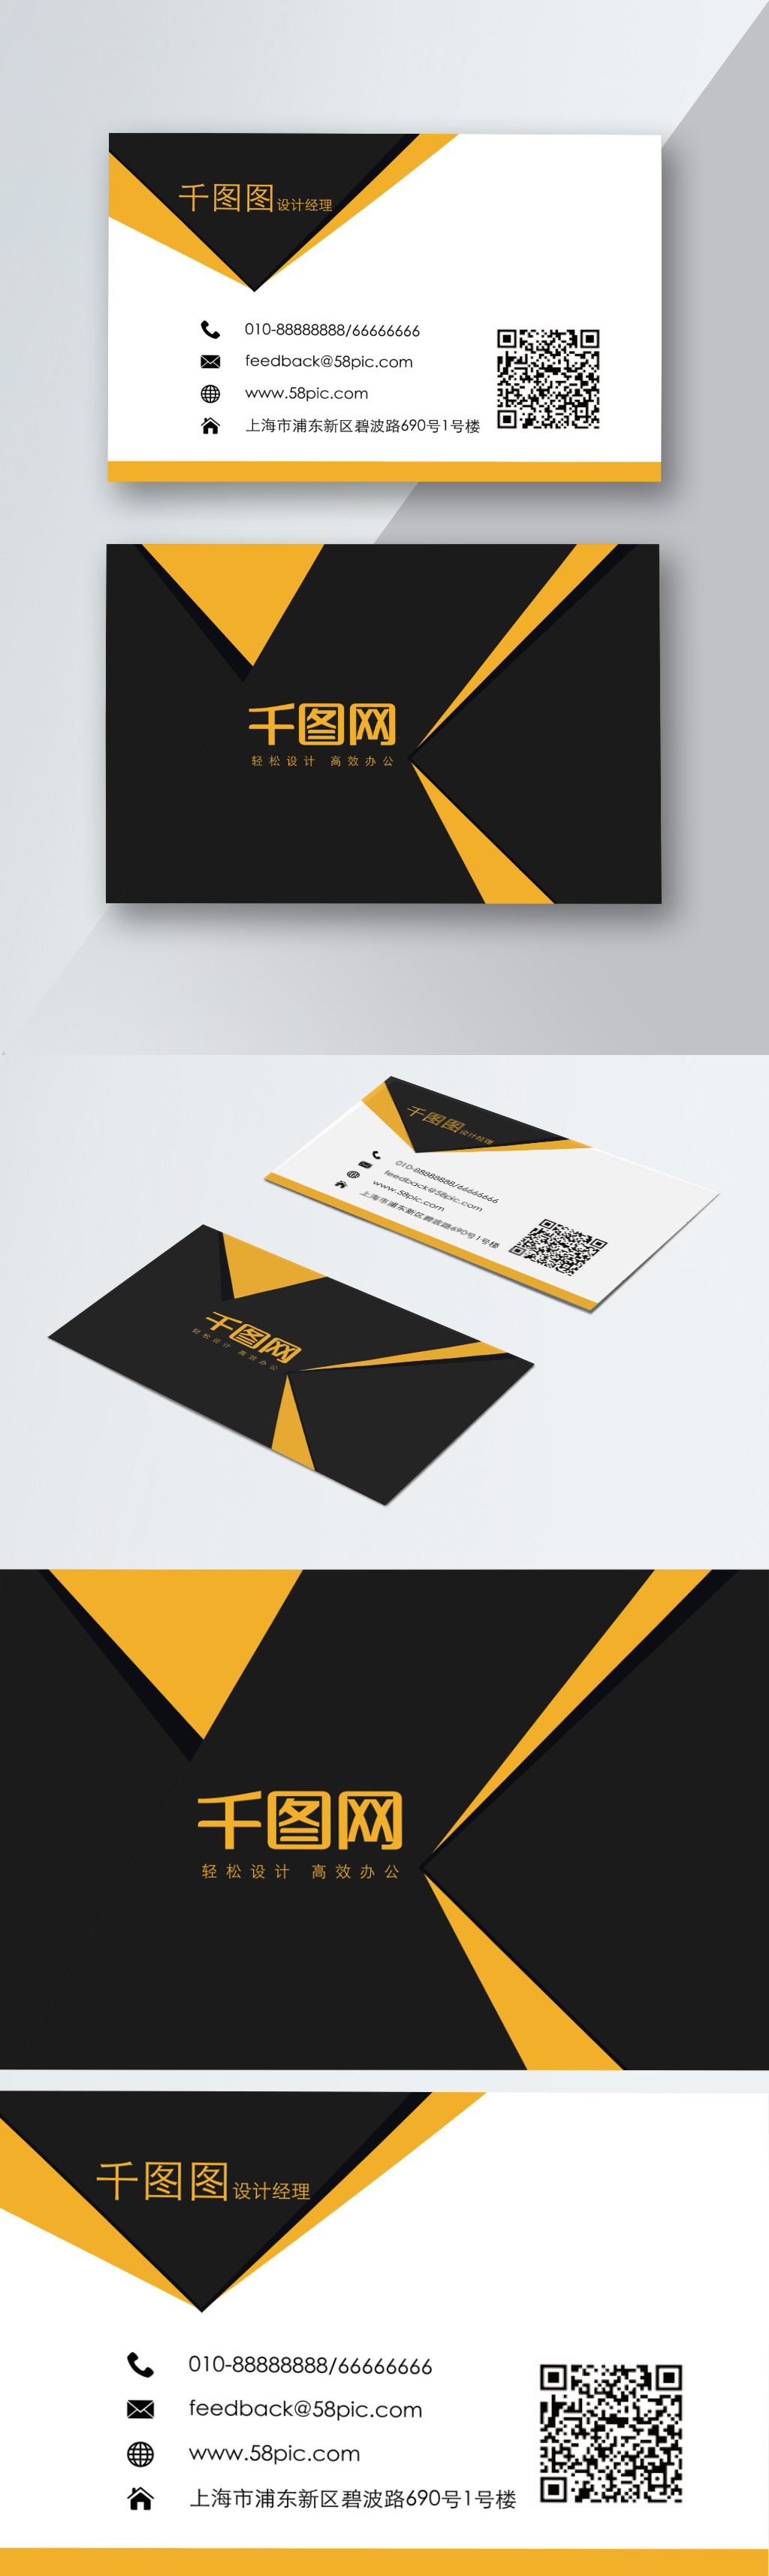 Download Yellow And Black Business Card Template Image Picture Free Download 450007589 Lovepik Com PSD Mockup Templates